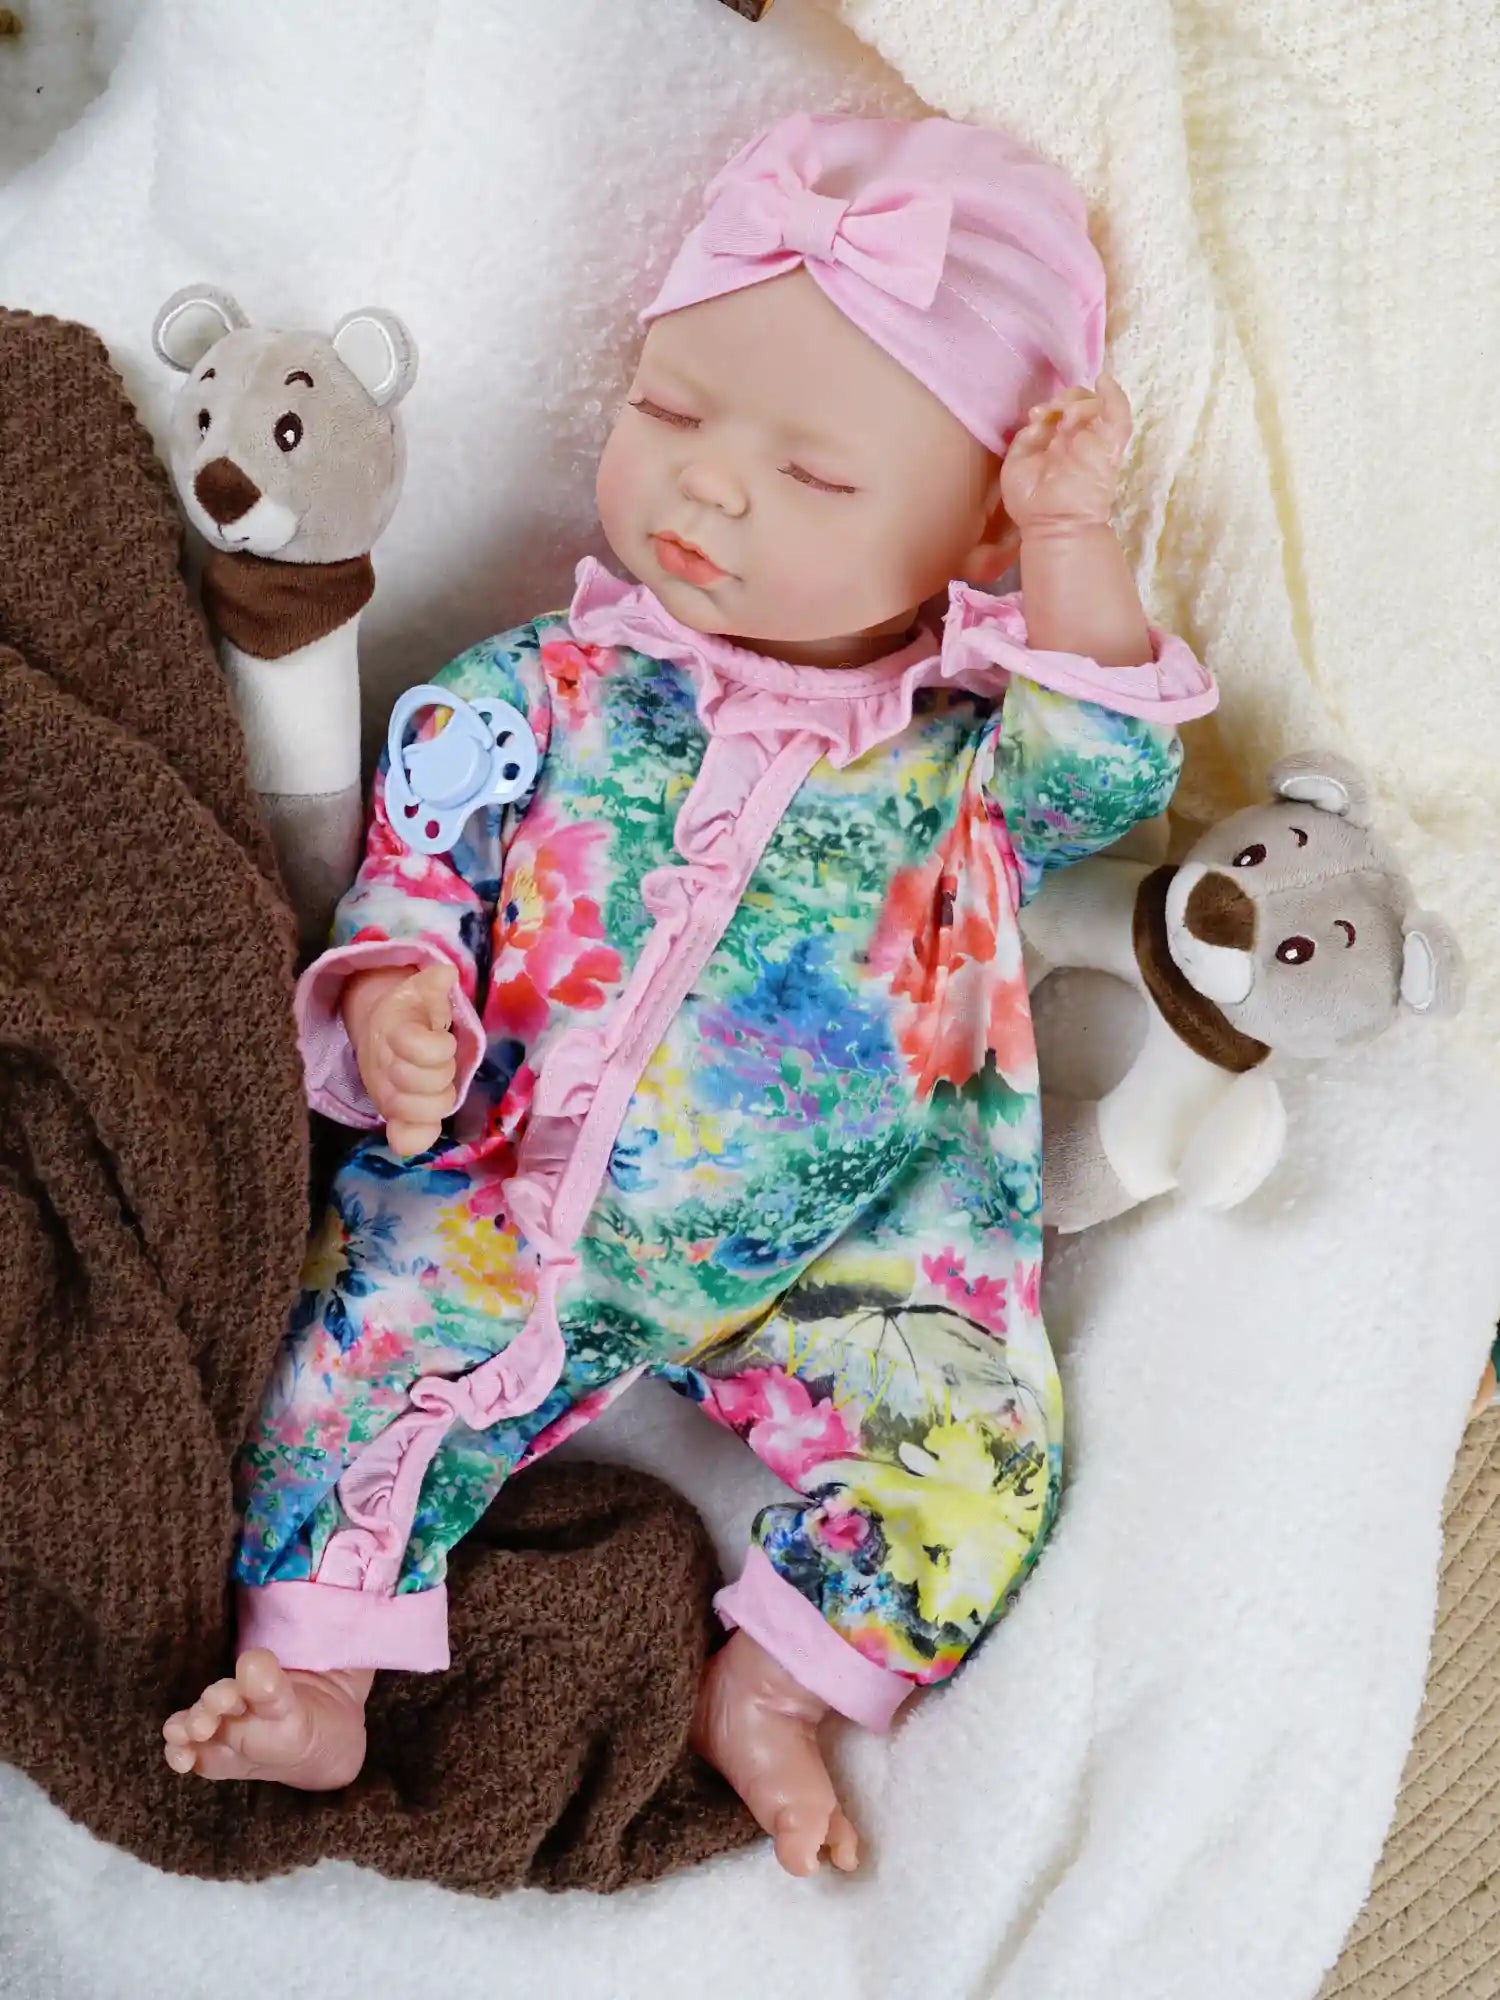 Colorful floral jumpsuit on lifelike reborn baby doll.